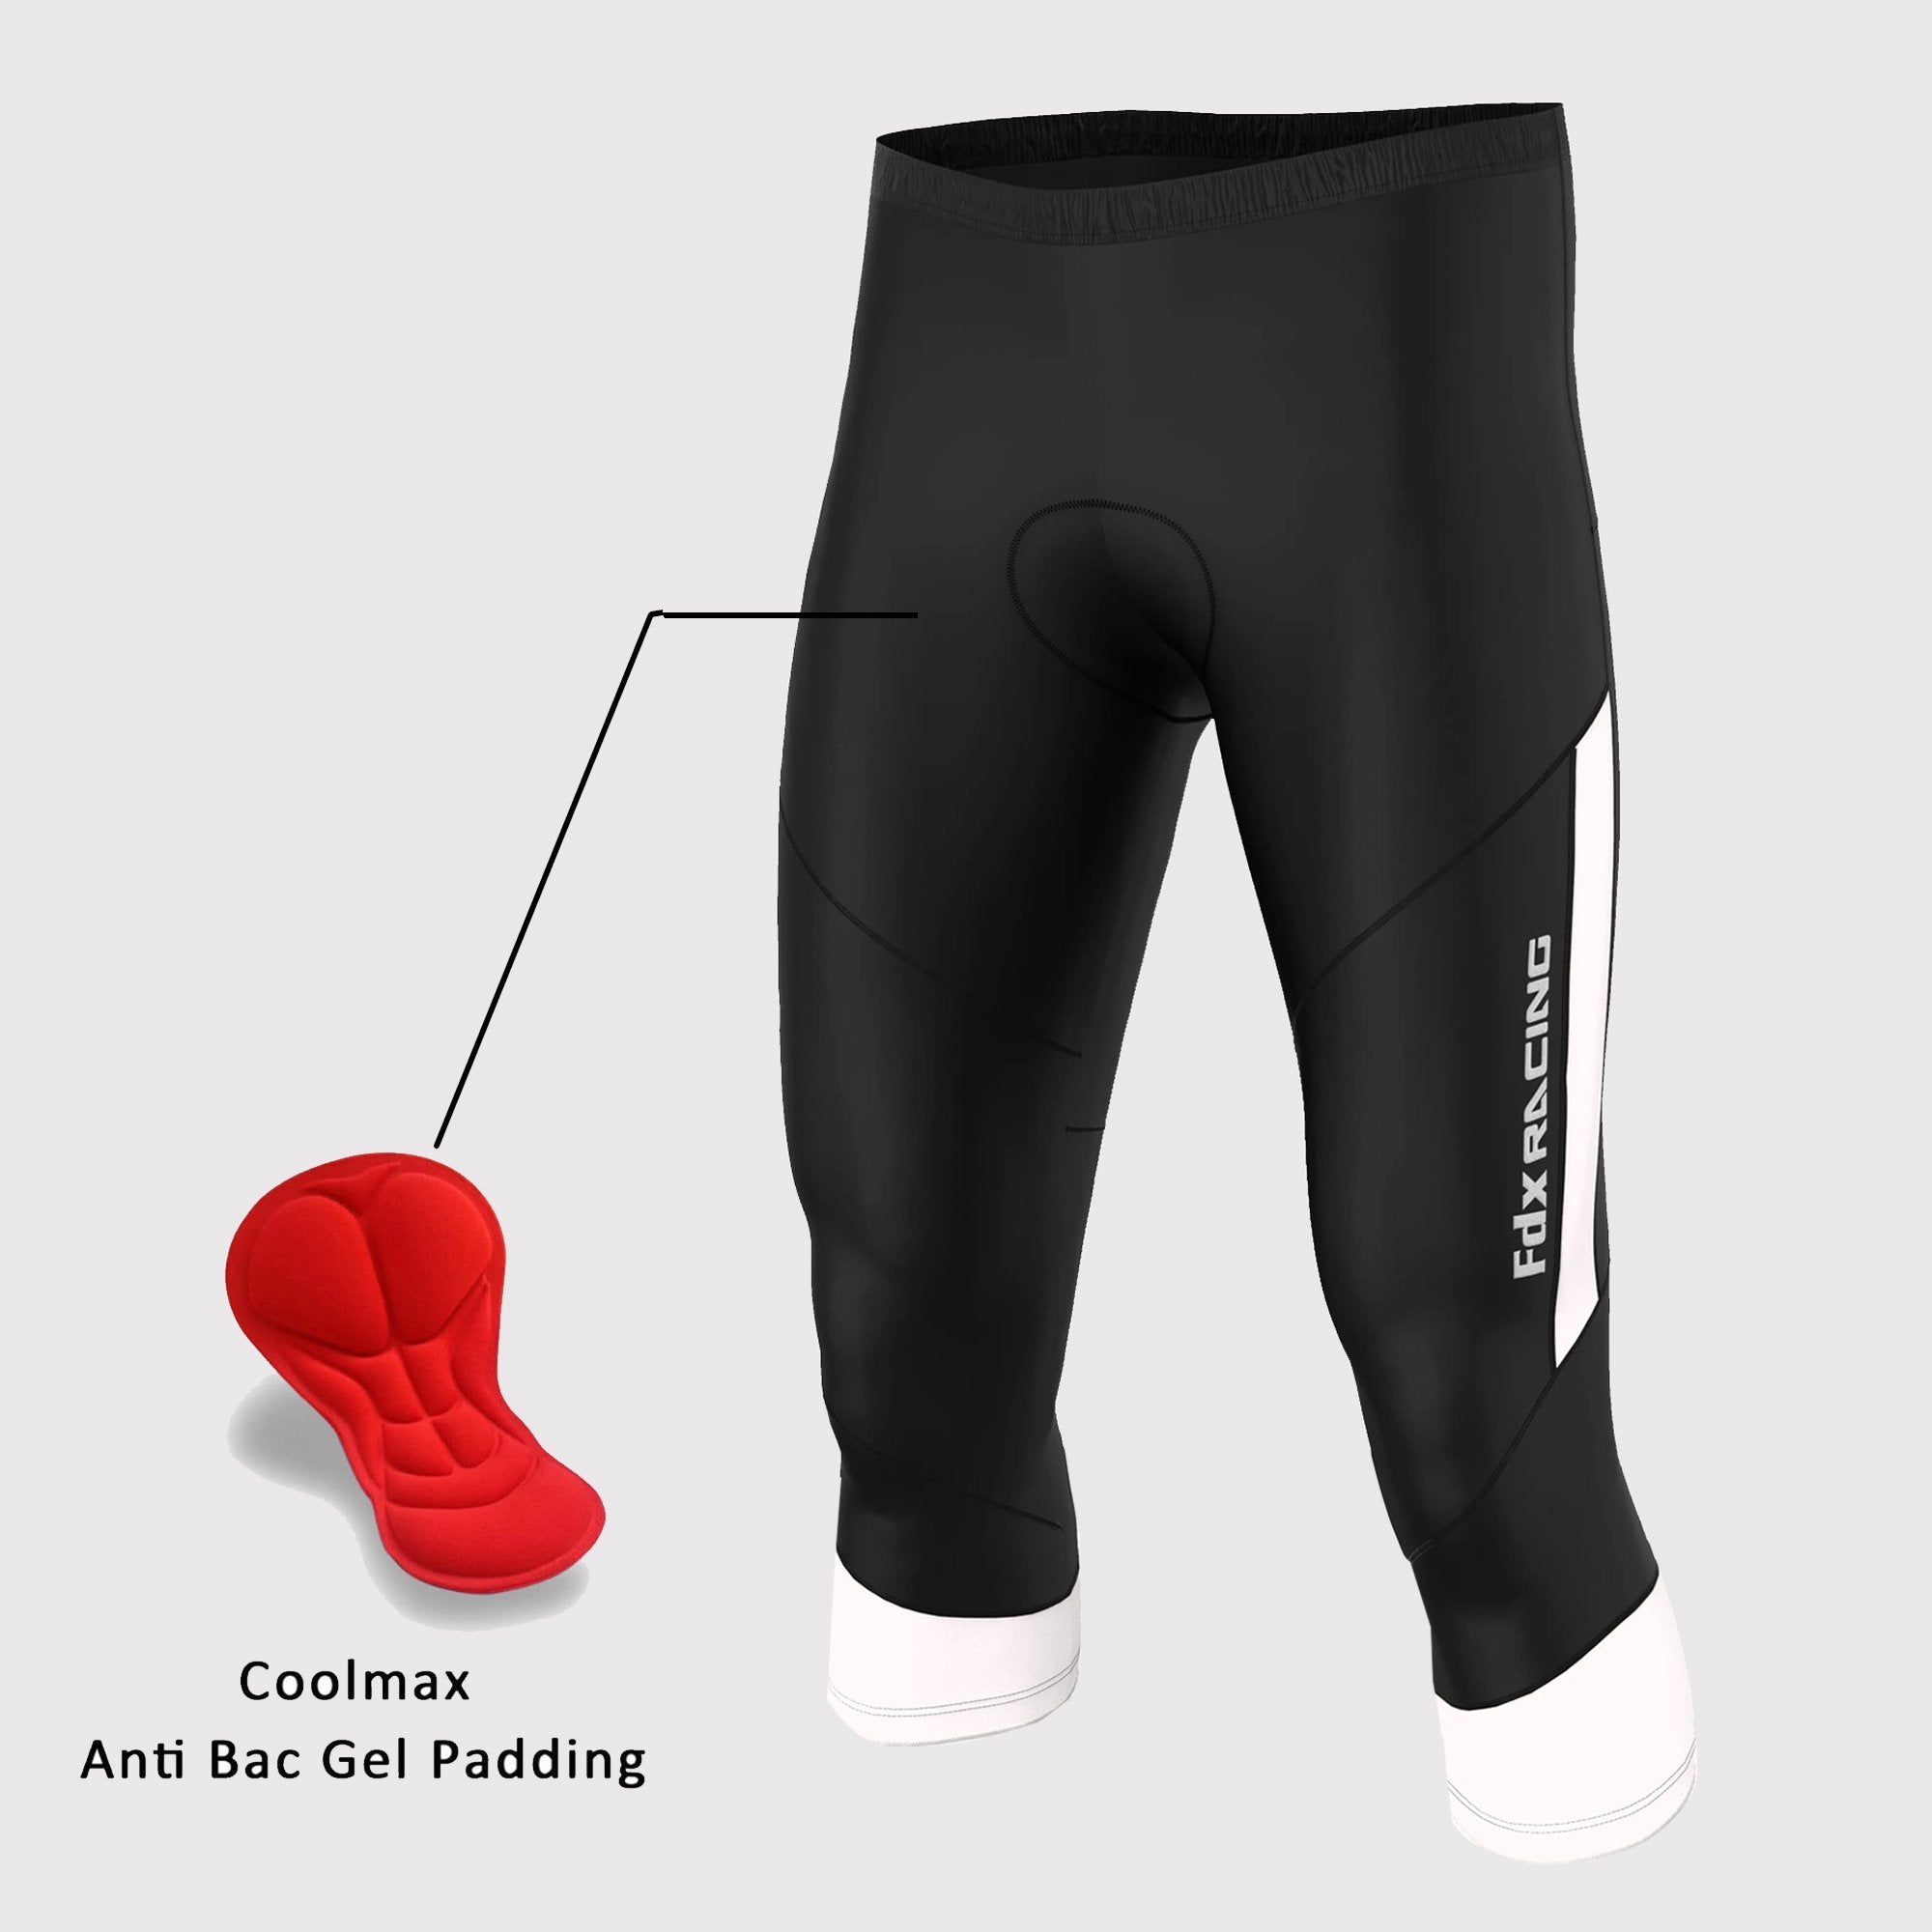 Fdx Men's Black & White Gel Padded 3/4 Cycling Shorts for Summer Best Outdoor Knickers Road Bike Short Length Pants - Gallop